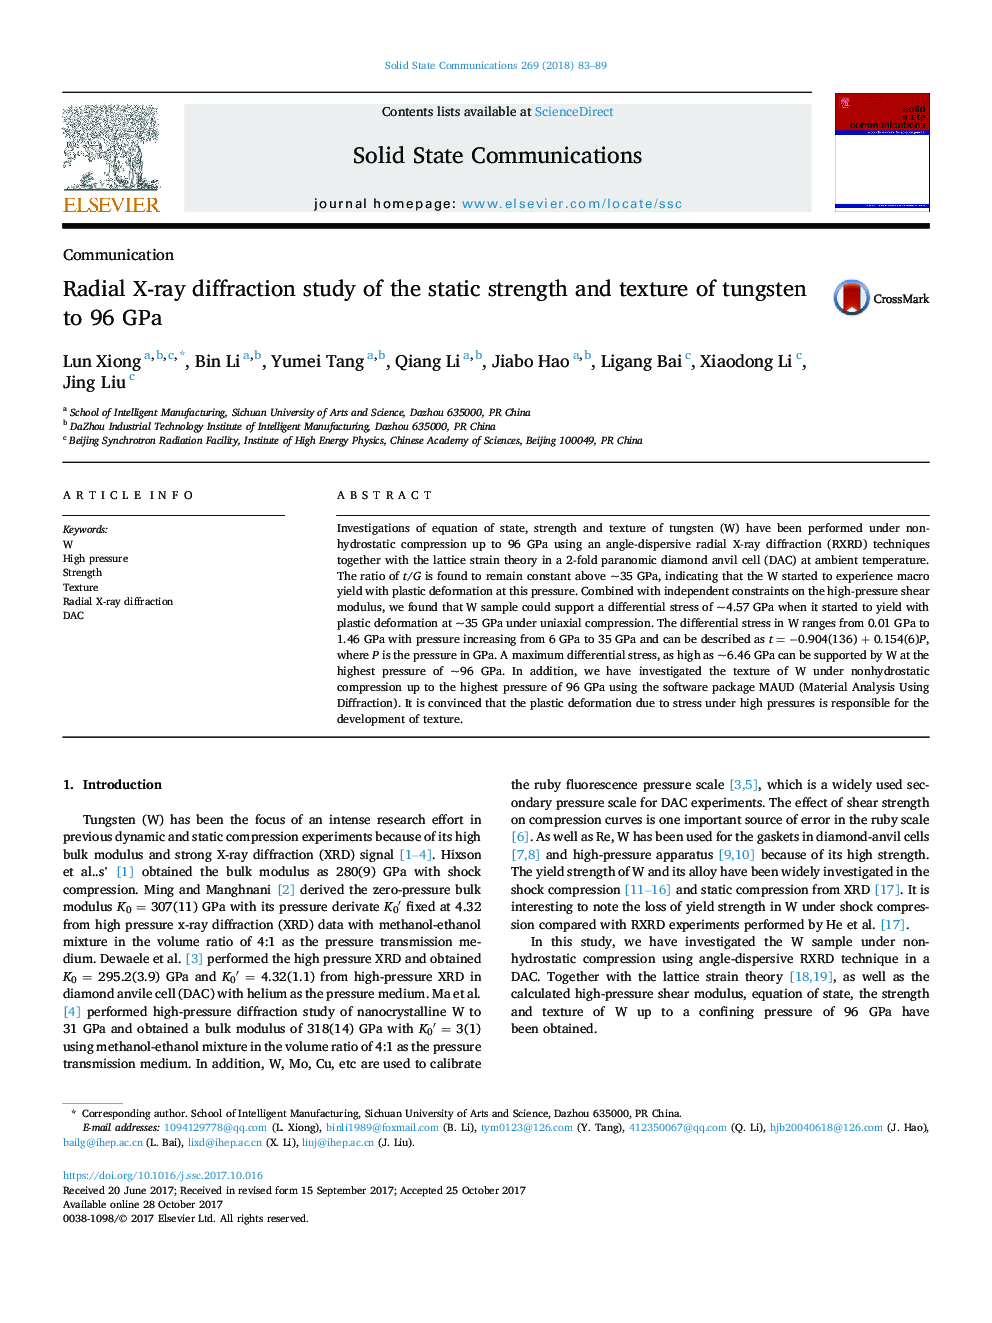 Radial X-ray diffraction study of the static strength and texture of tungsten to 96Â GPa